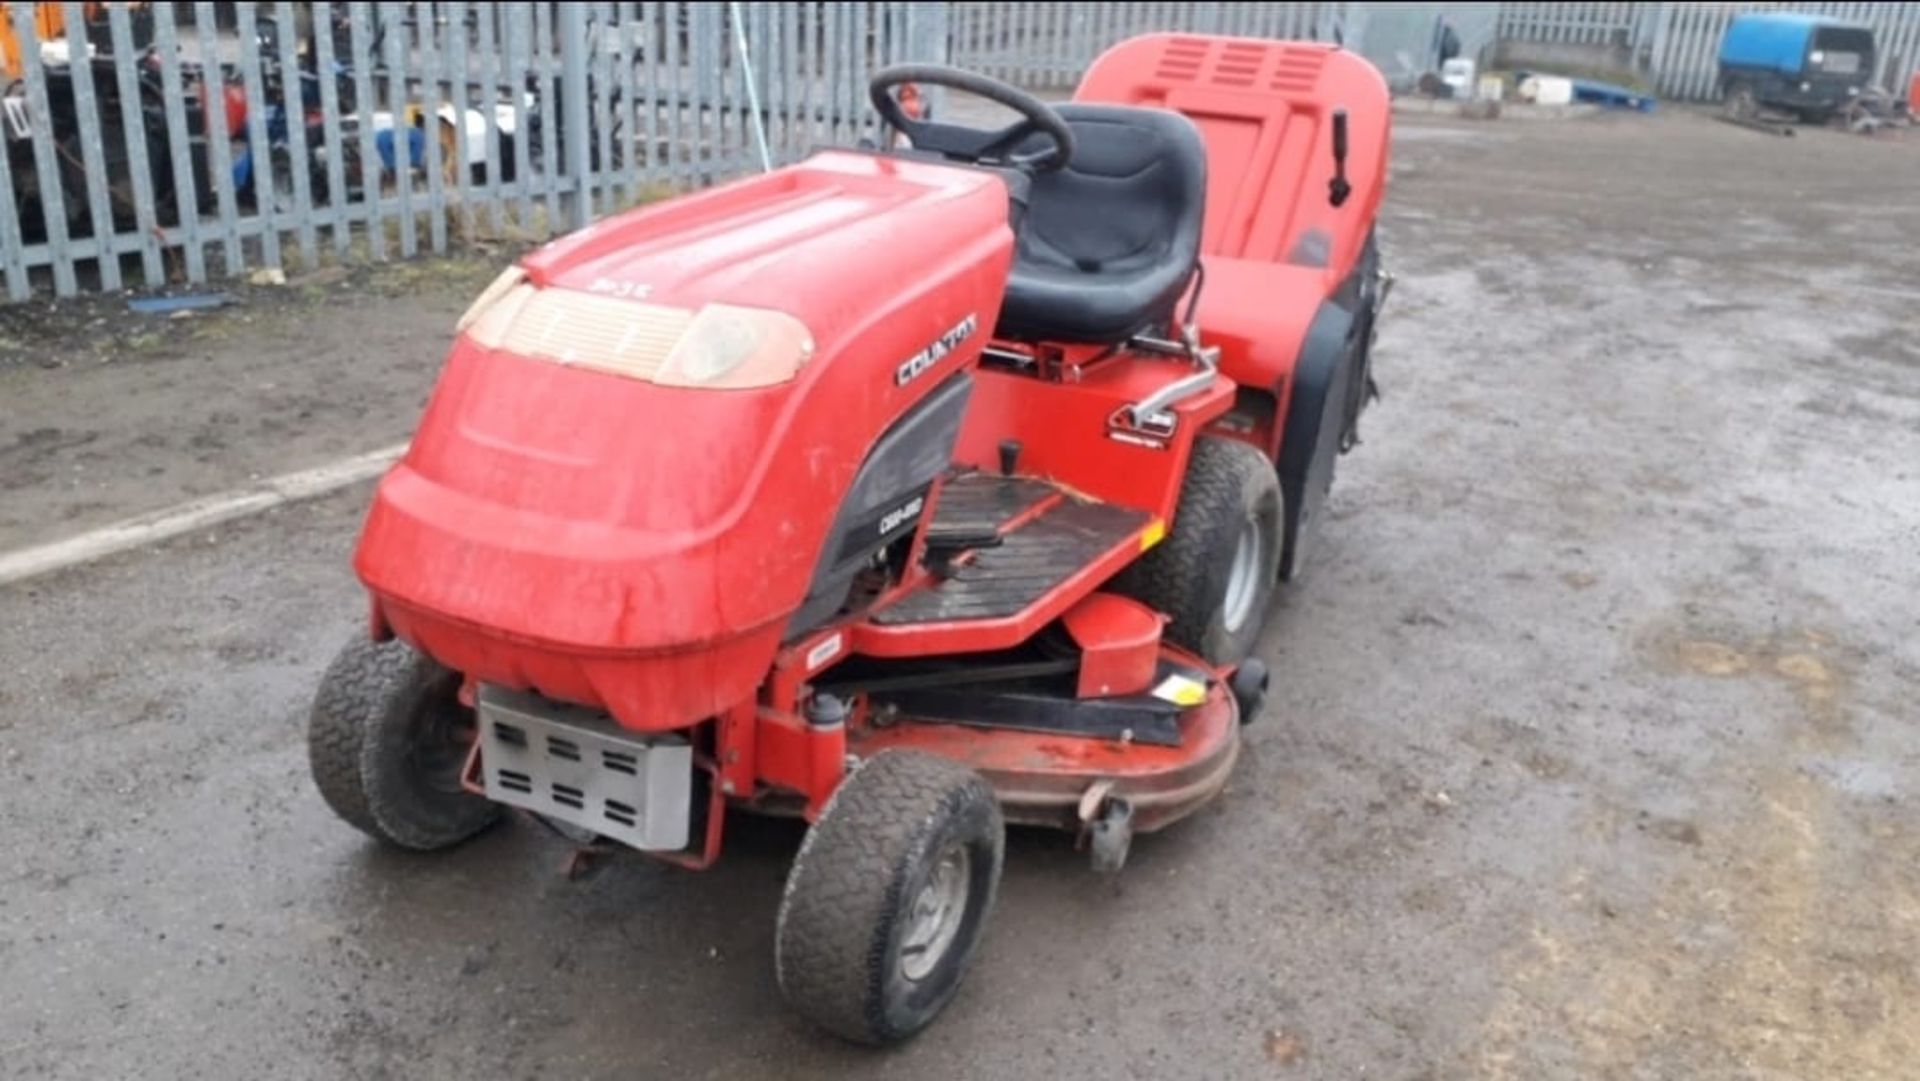 COUNTAX C800H PETROL RIDE ON MOWER, FULL WORKING ORDER WITH SWEEPER AND GRASS BOX *NO VAT* - Image 5 of 8